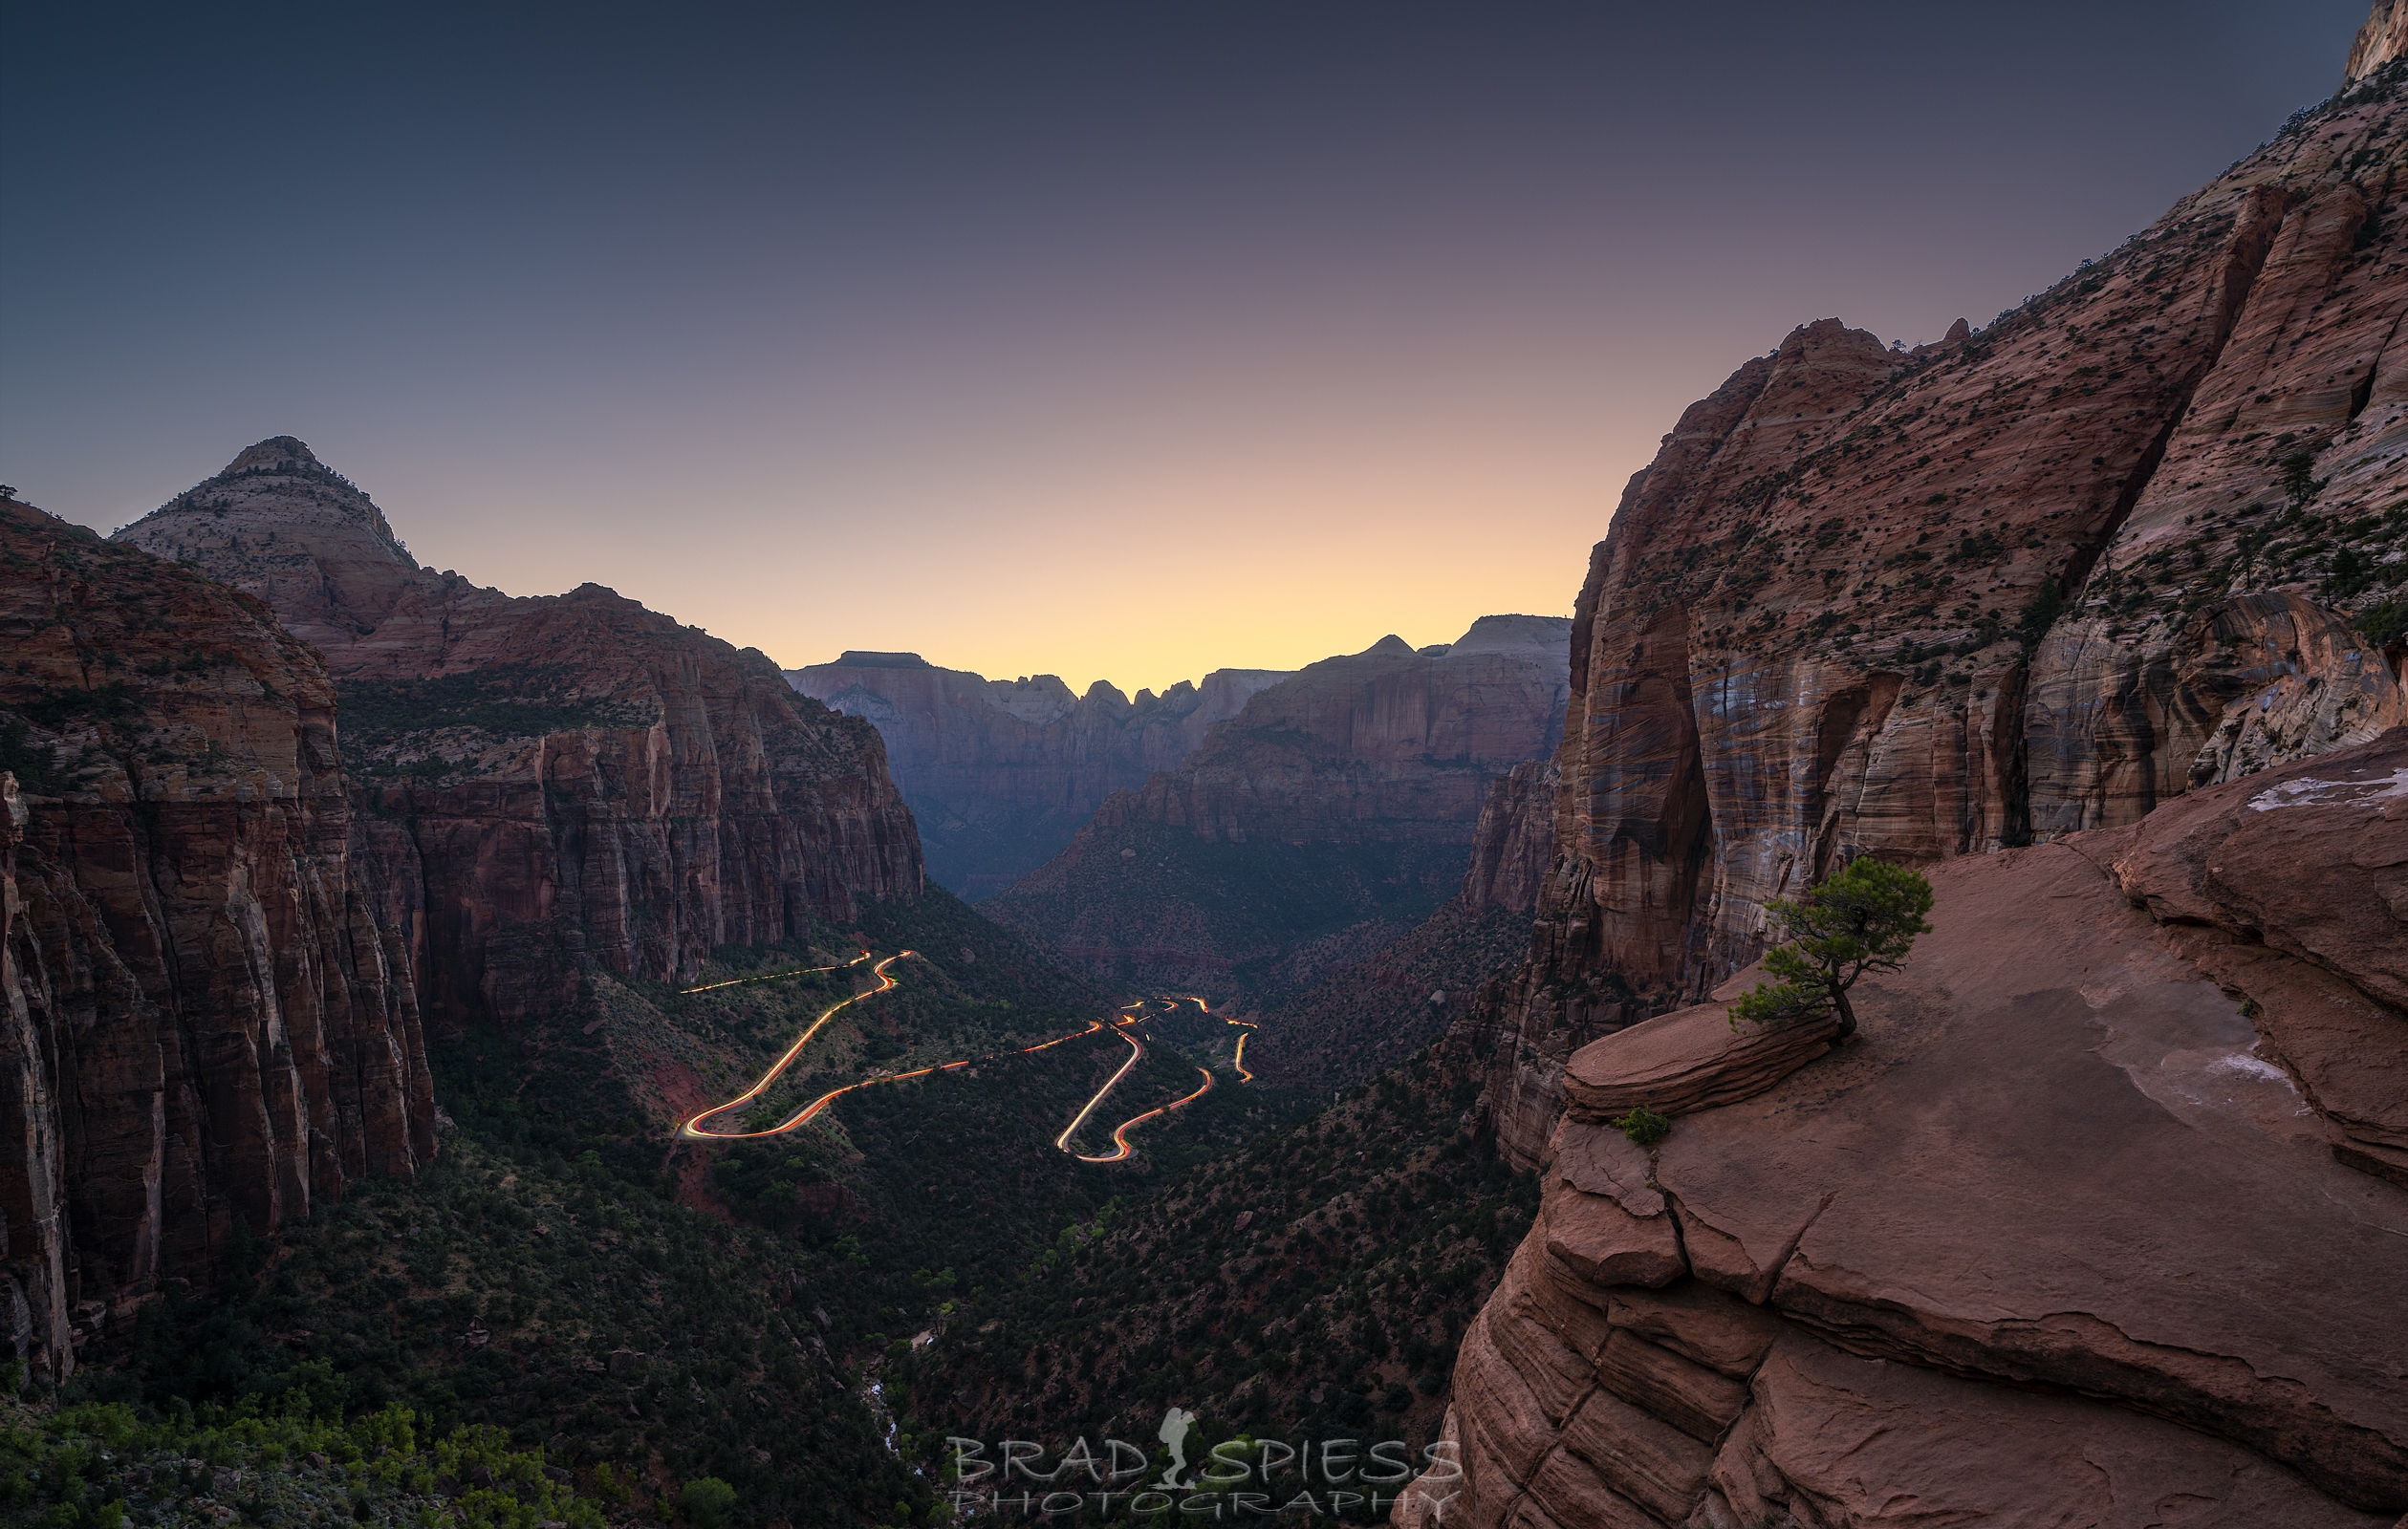 The cars leaving light trails below as seen from the Overlook Trail in Zion National Park